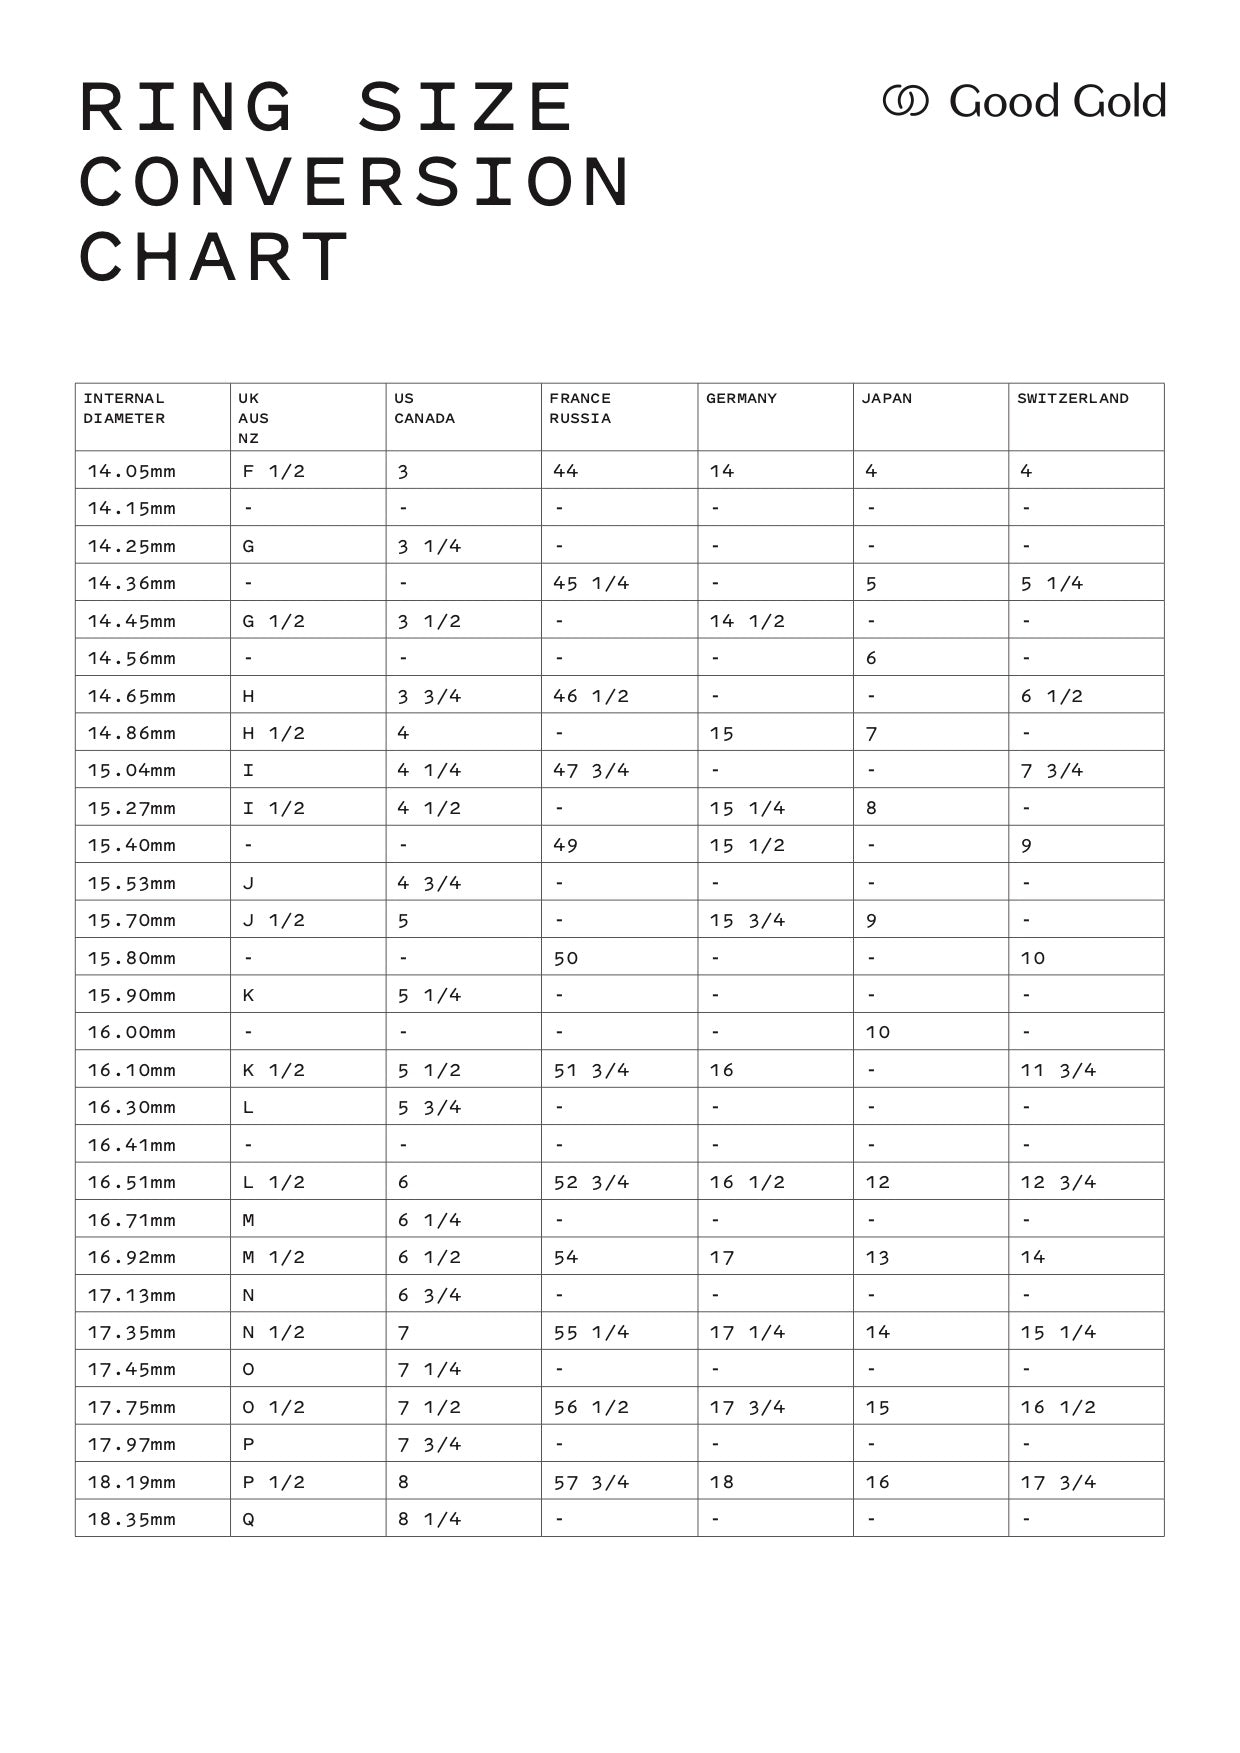 Ring Sizes and International Conversion Chart - Moores Jewellers